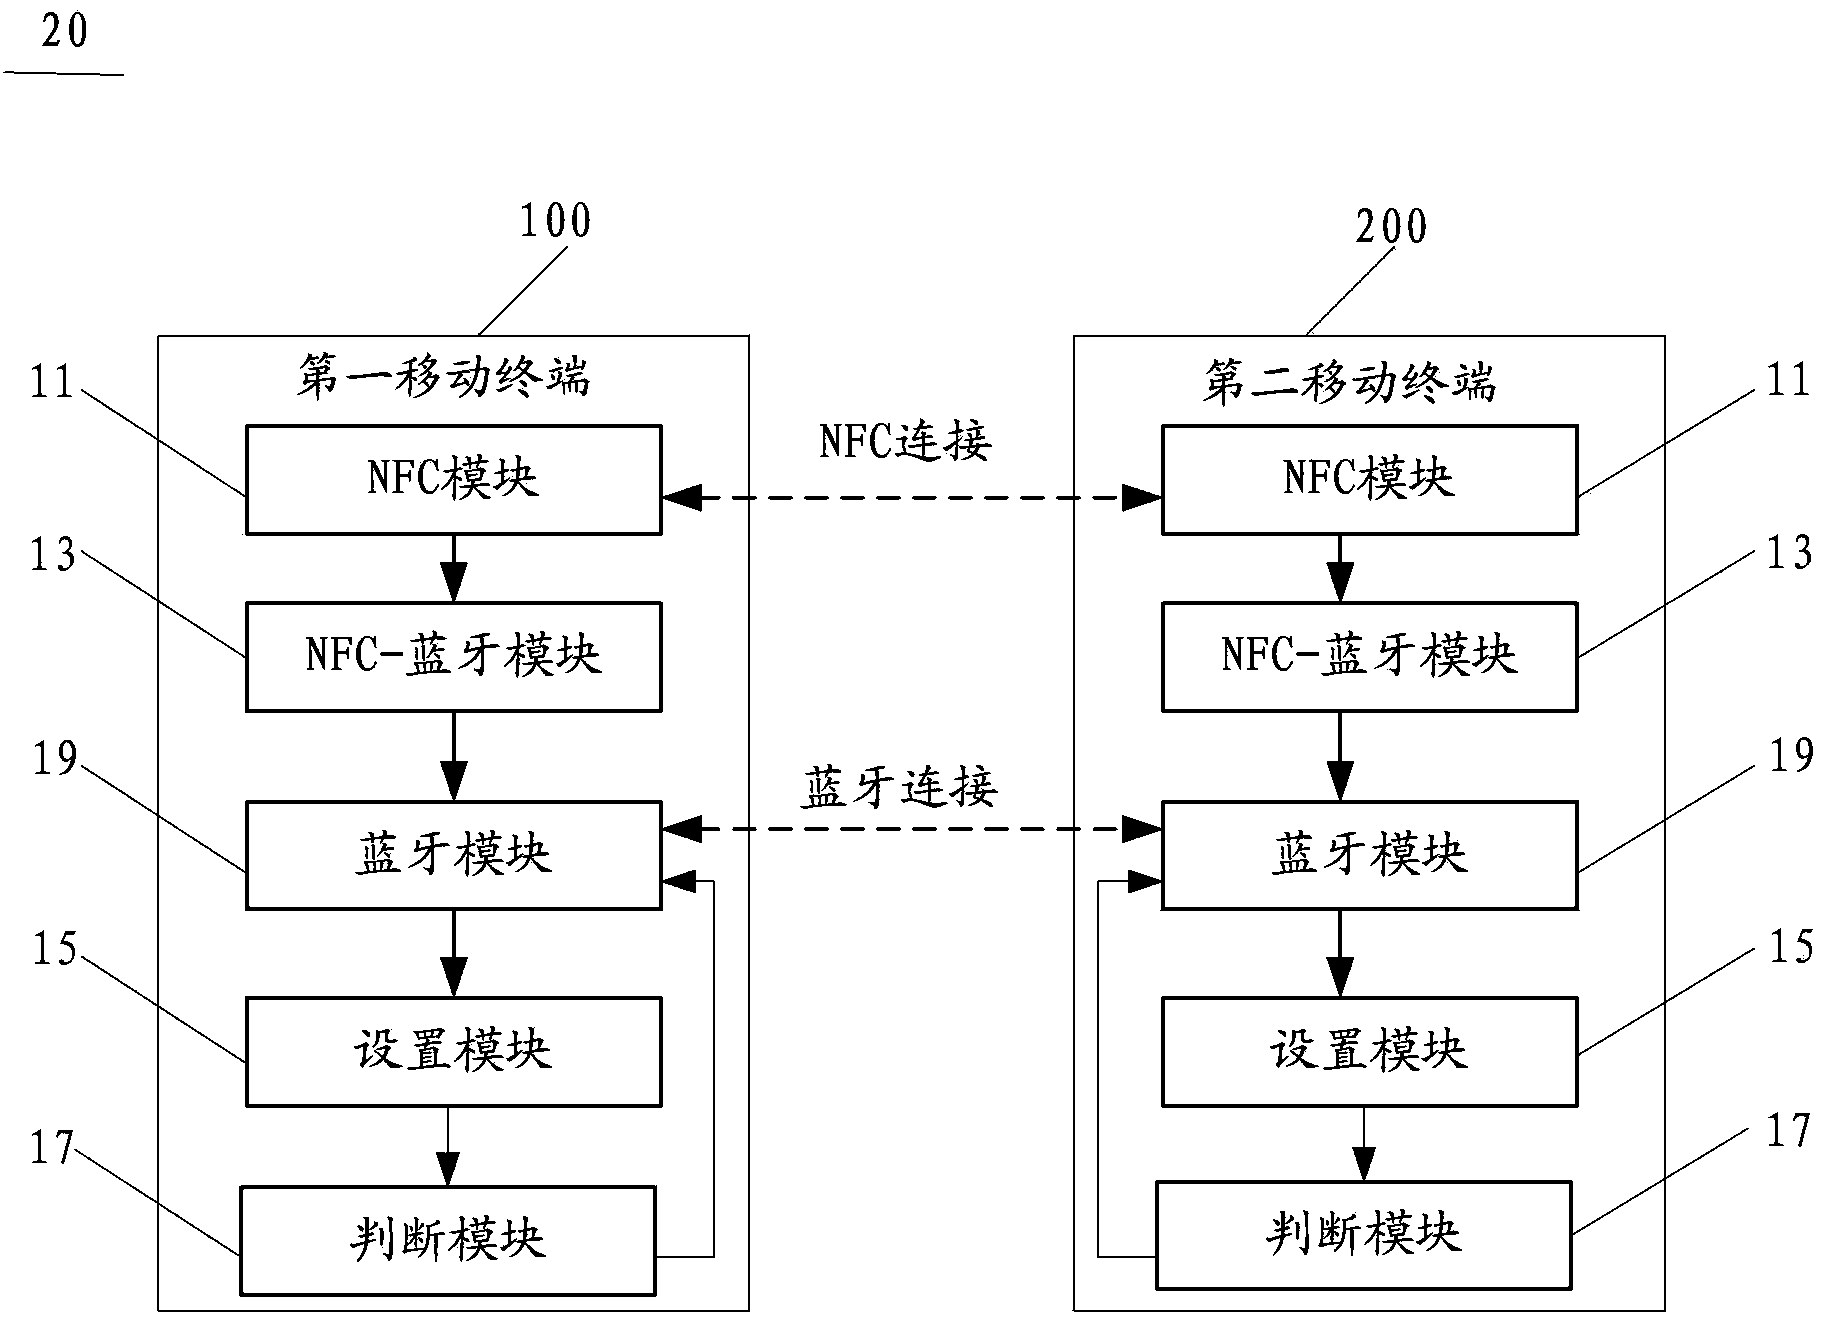 Method and system for performing call forwarding based on NFC and Bluetooth